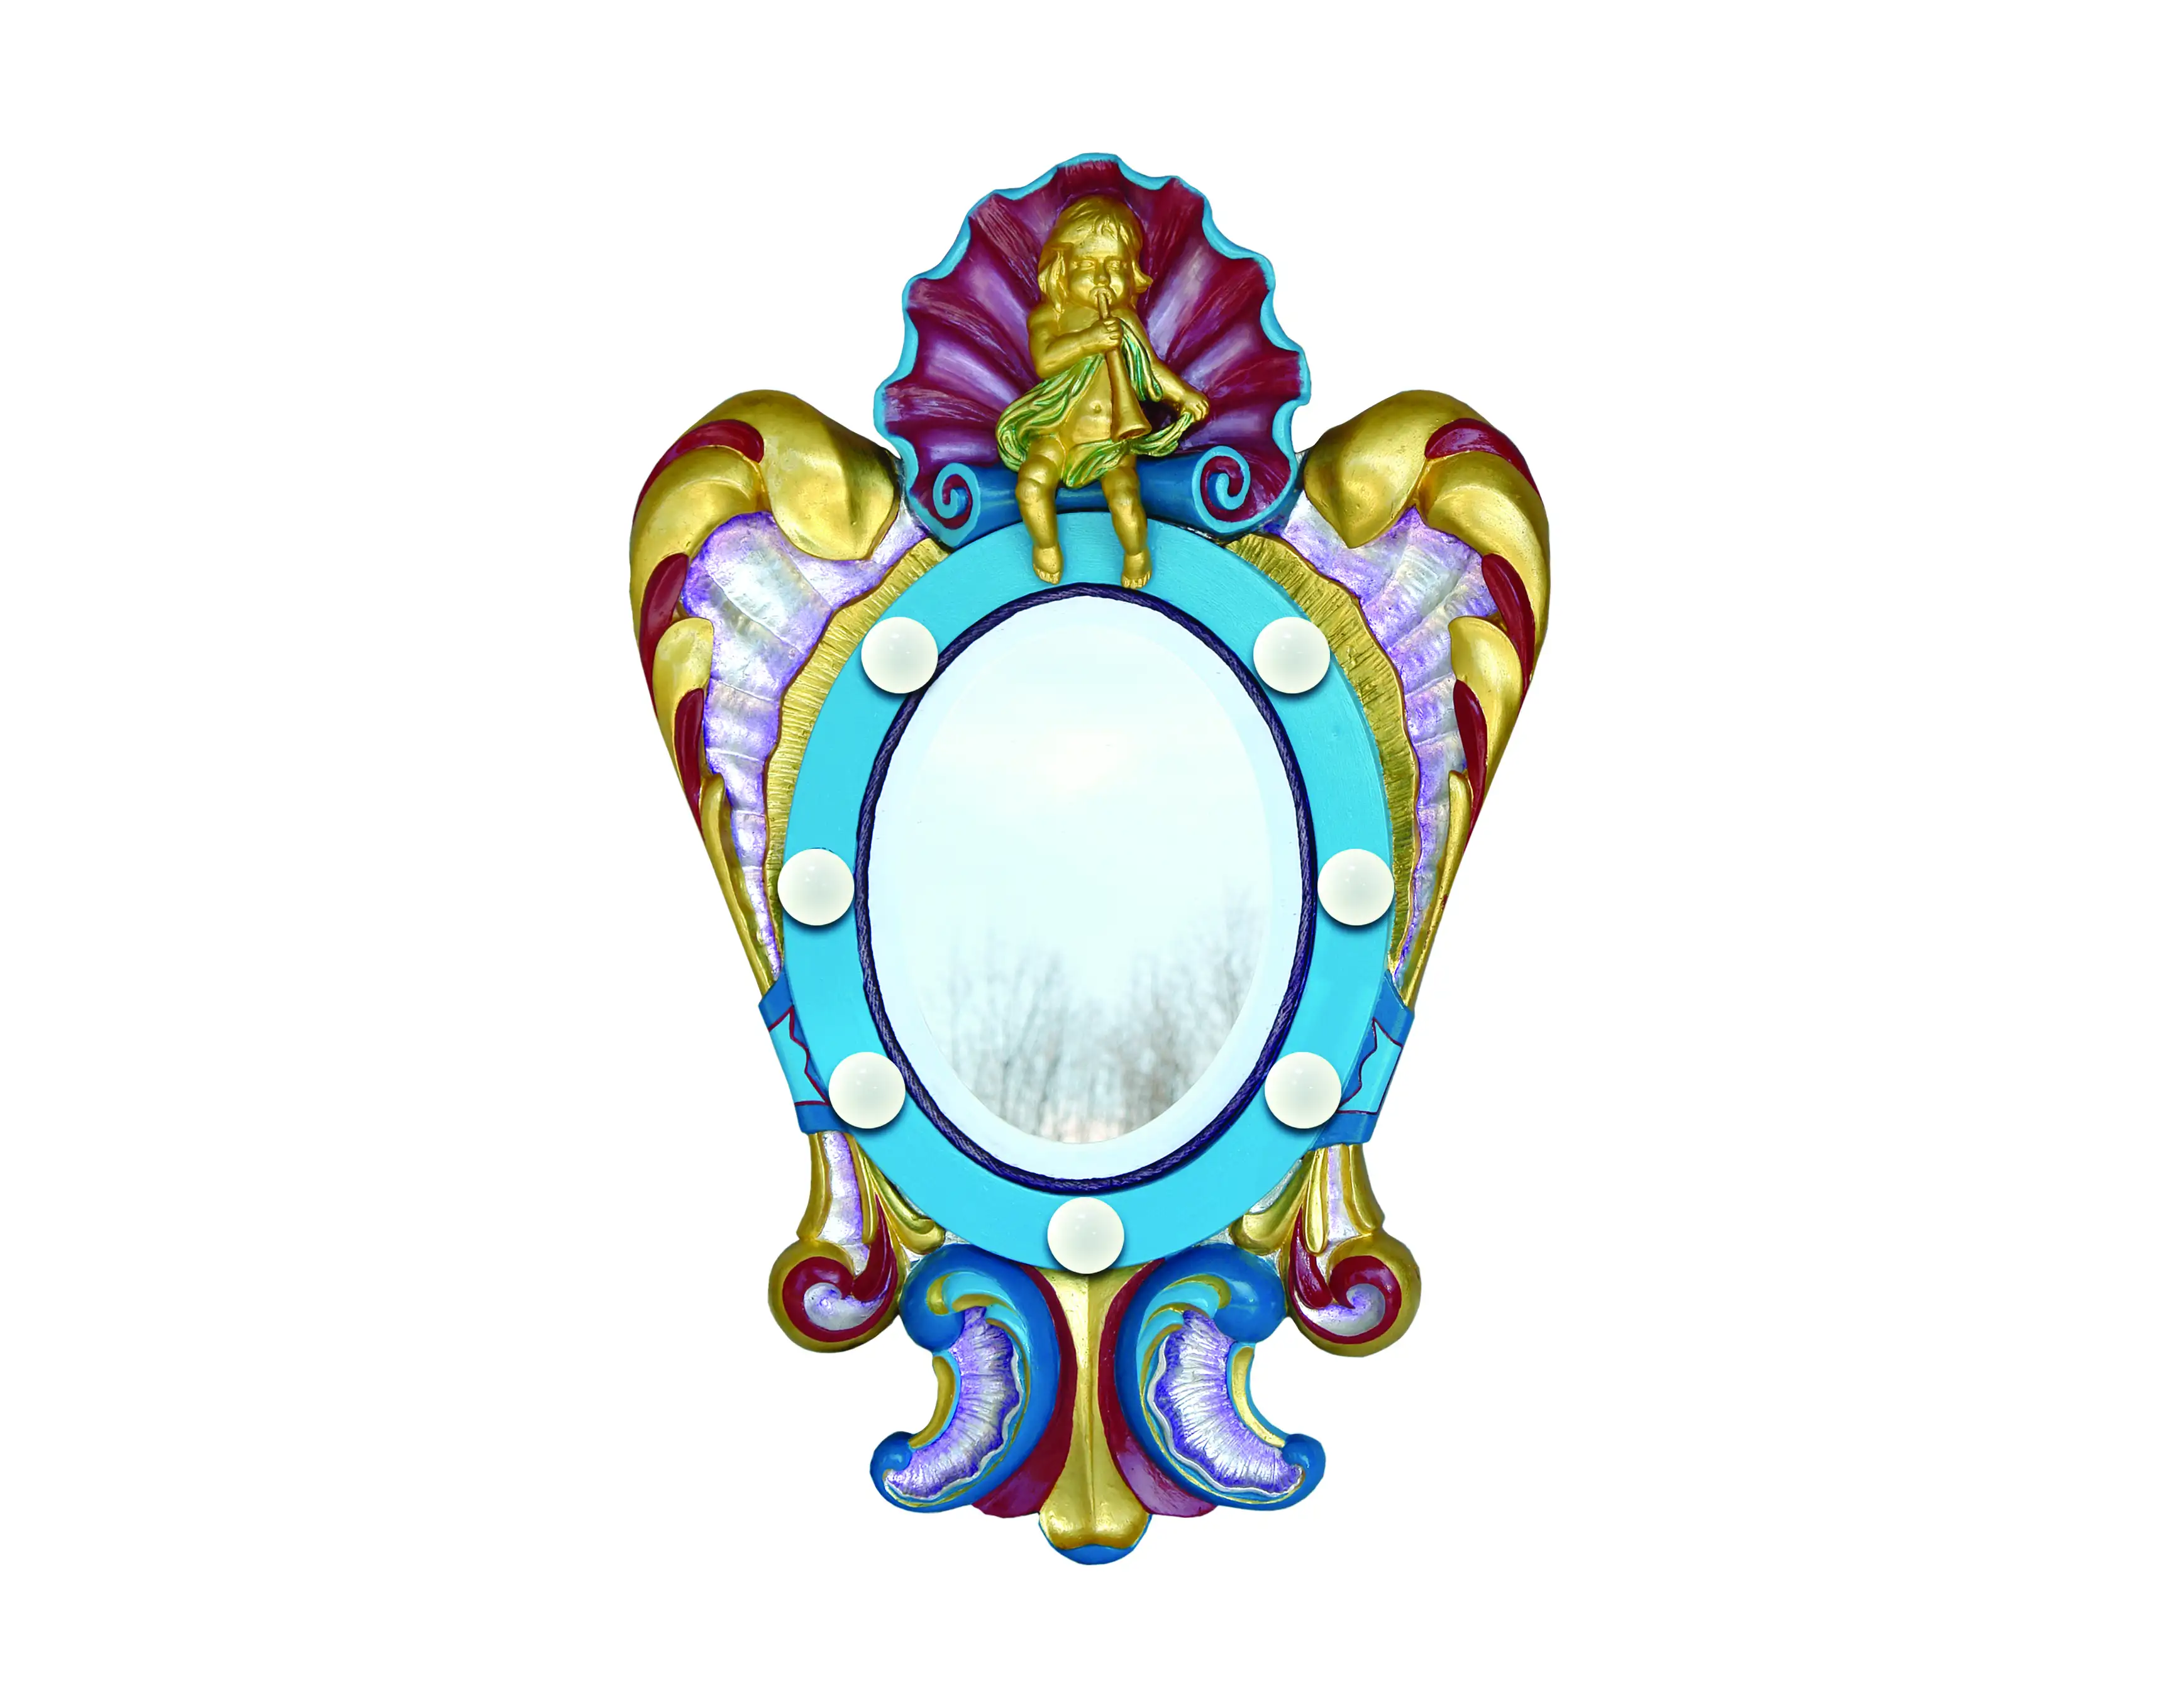 Ornate Mirrored Shield available for sponsorship